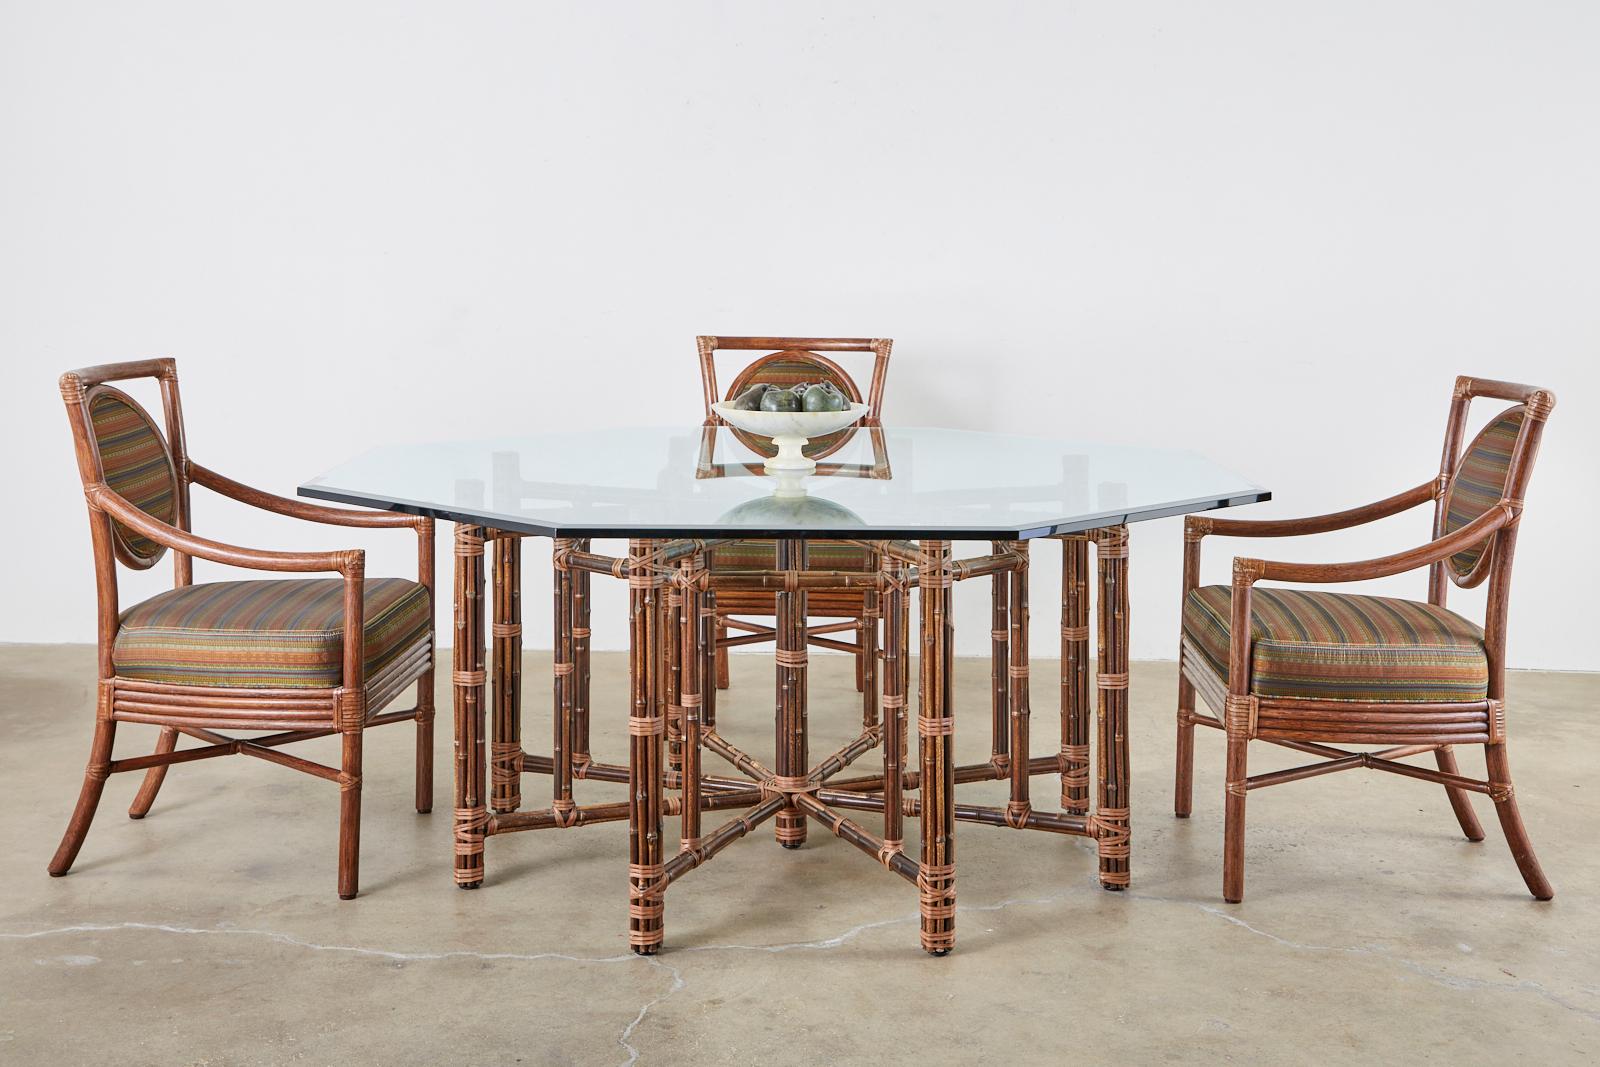 Genuine McGuire bamboo rattan dining table made in the California organic modern style. Made from an iron base painted golden gate bridge orange for authenticity and covered with bamboo rattan poles lashed together with leather rawhide laces.